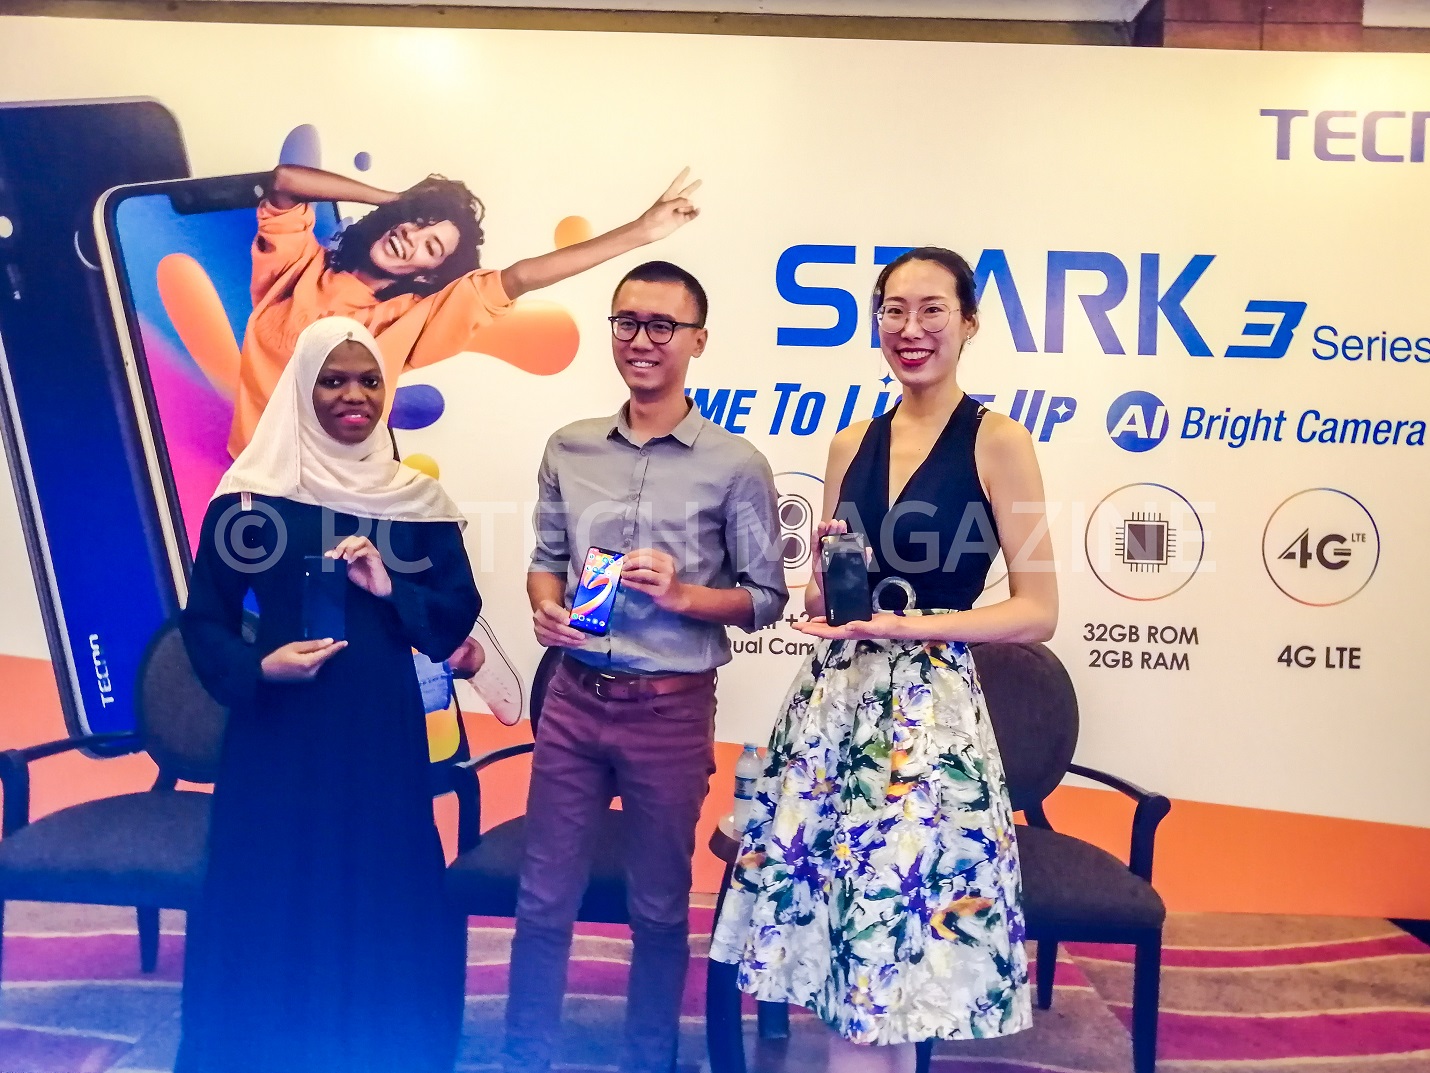 In Pictorial (L-R): Kantinti Huddah; Tecno Uganda Products Consultant, Shiva; Tecno Uganda Brands Manager, and Gladys Liu; Tecno Uganda Marketing Manager pose for a group photo with holding the TECNO Spark 3 and Spark 3 Pro at their launch at the Sheraton Hotel in Kampala, Uganda on Monday May, 6th 2019. Photo by Olupot Nathan Ernest/PC TECH MAGAZINE.